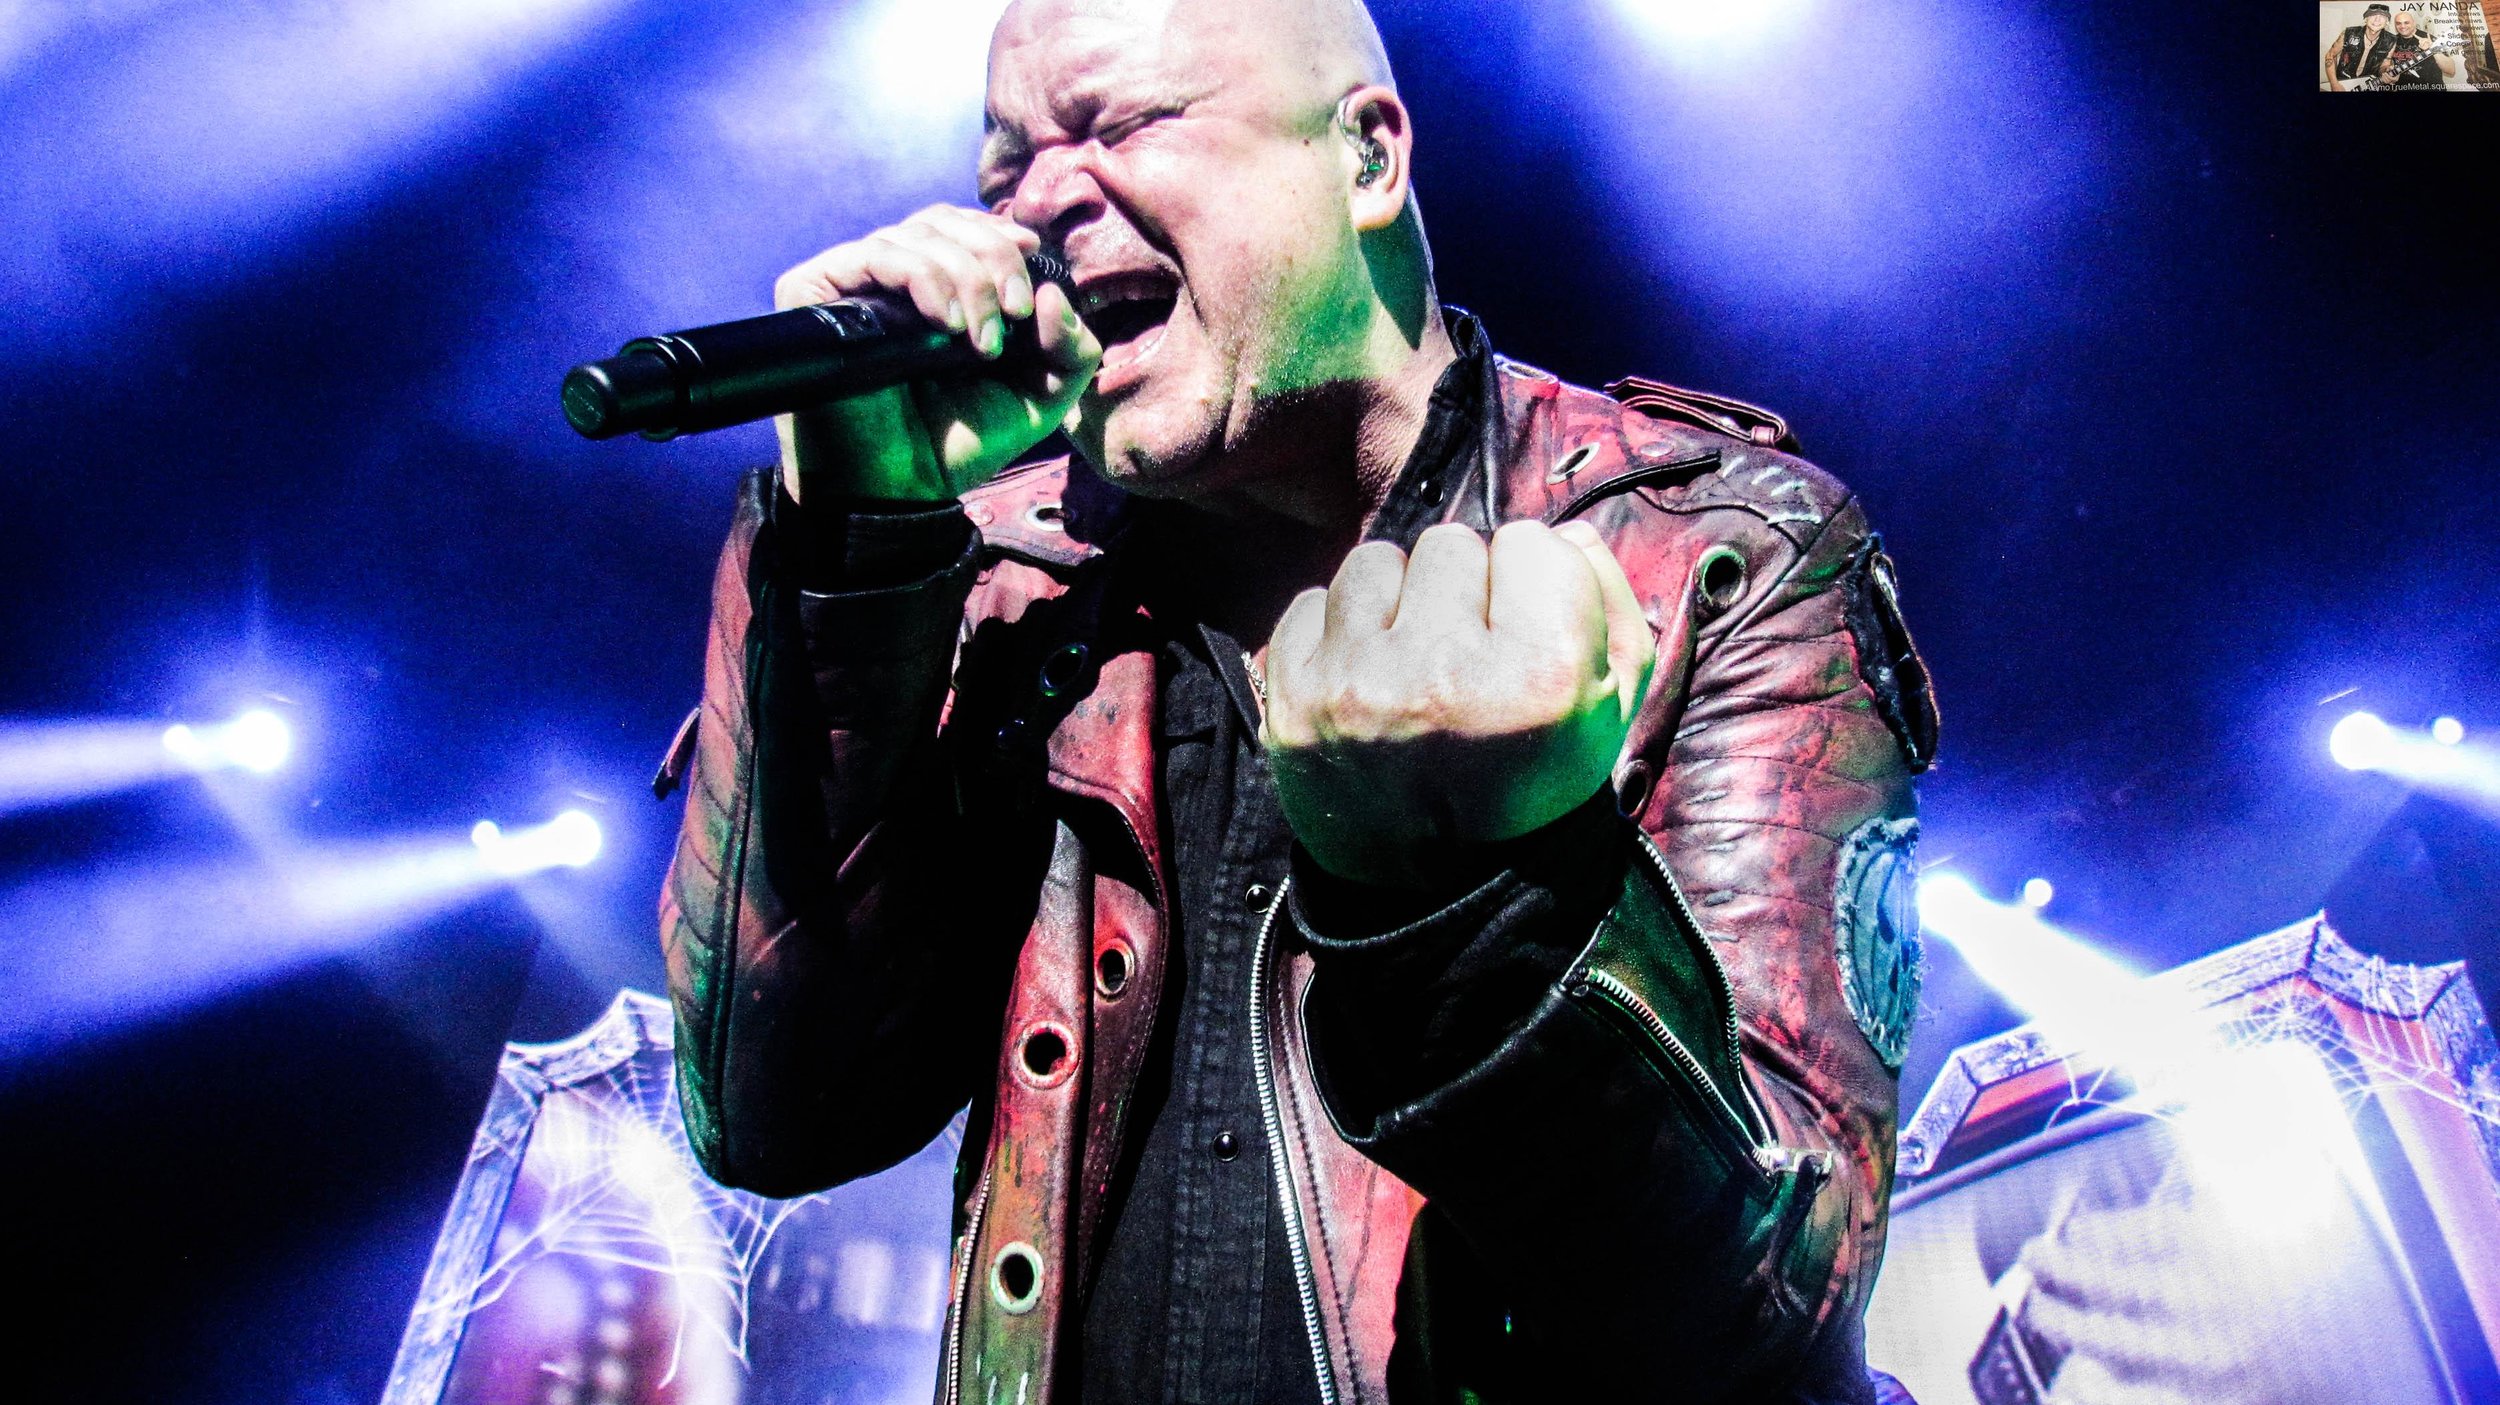  Kiske was the vocalist on Helloween’s two most epic albums,  Keeper of the Seven Keys: Part 1  and  2  in 1987 and 1988. 